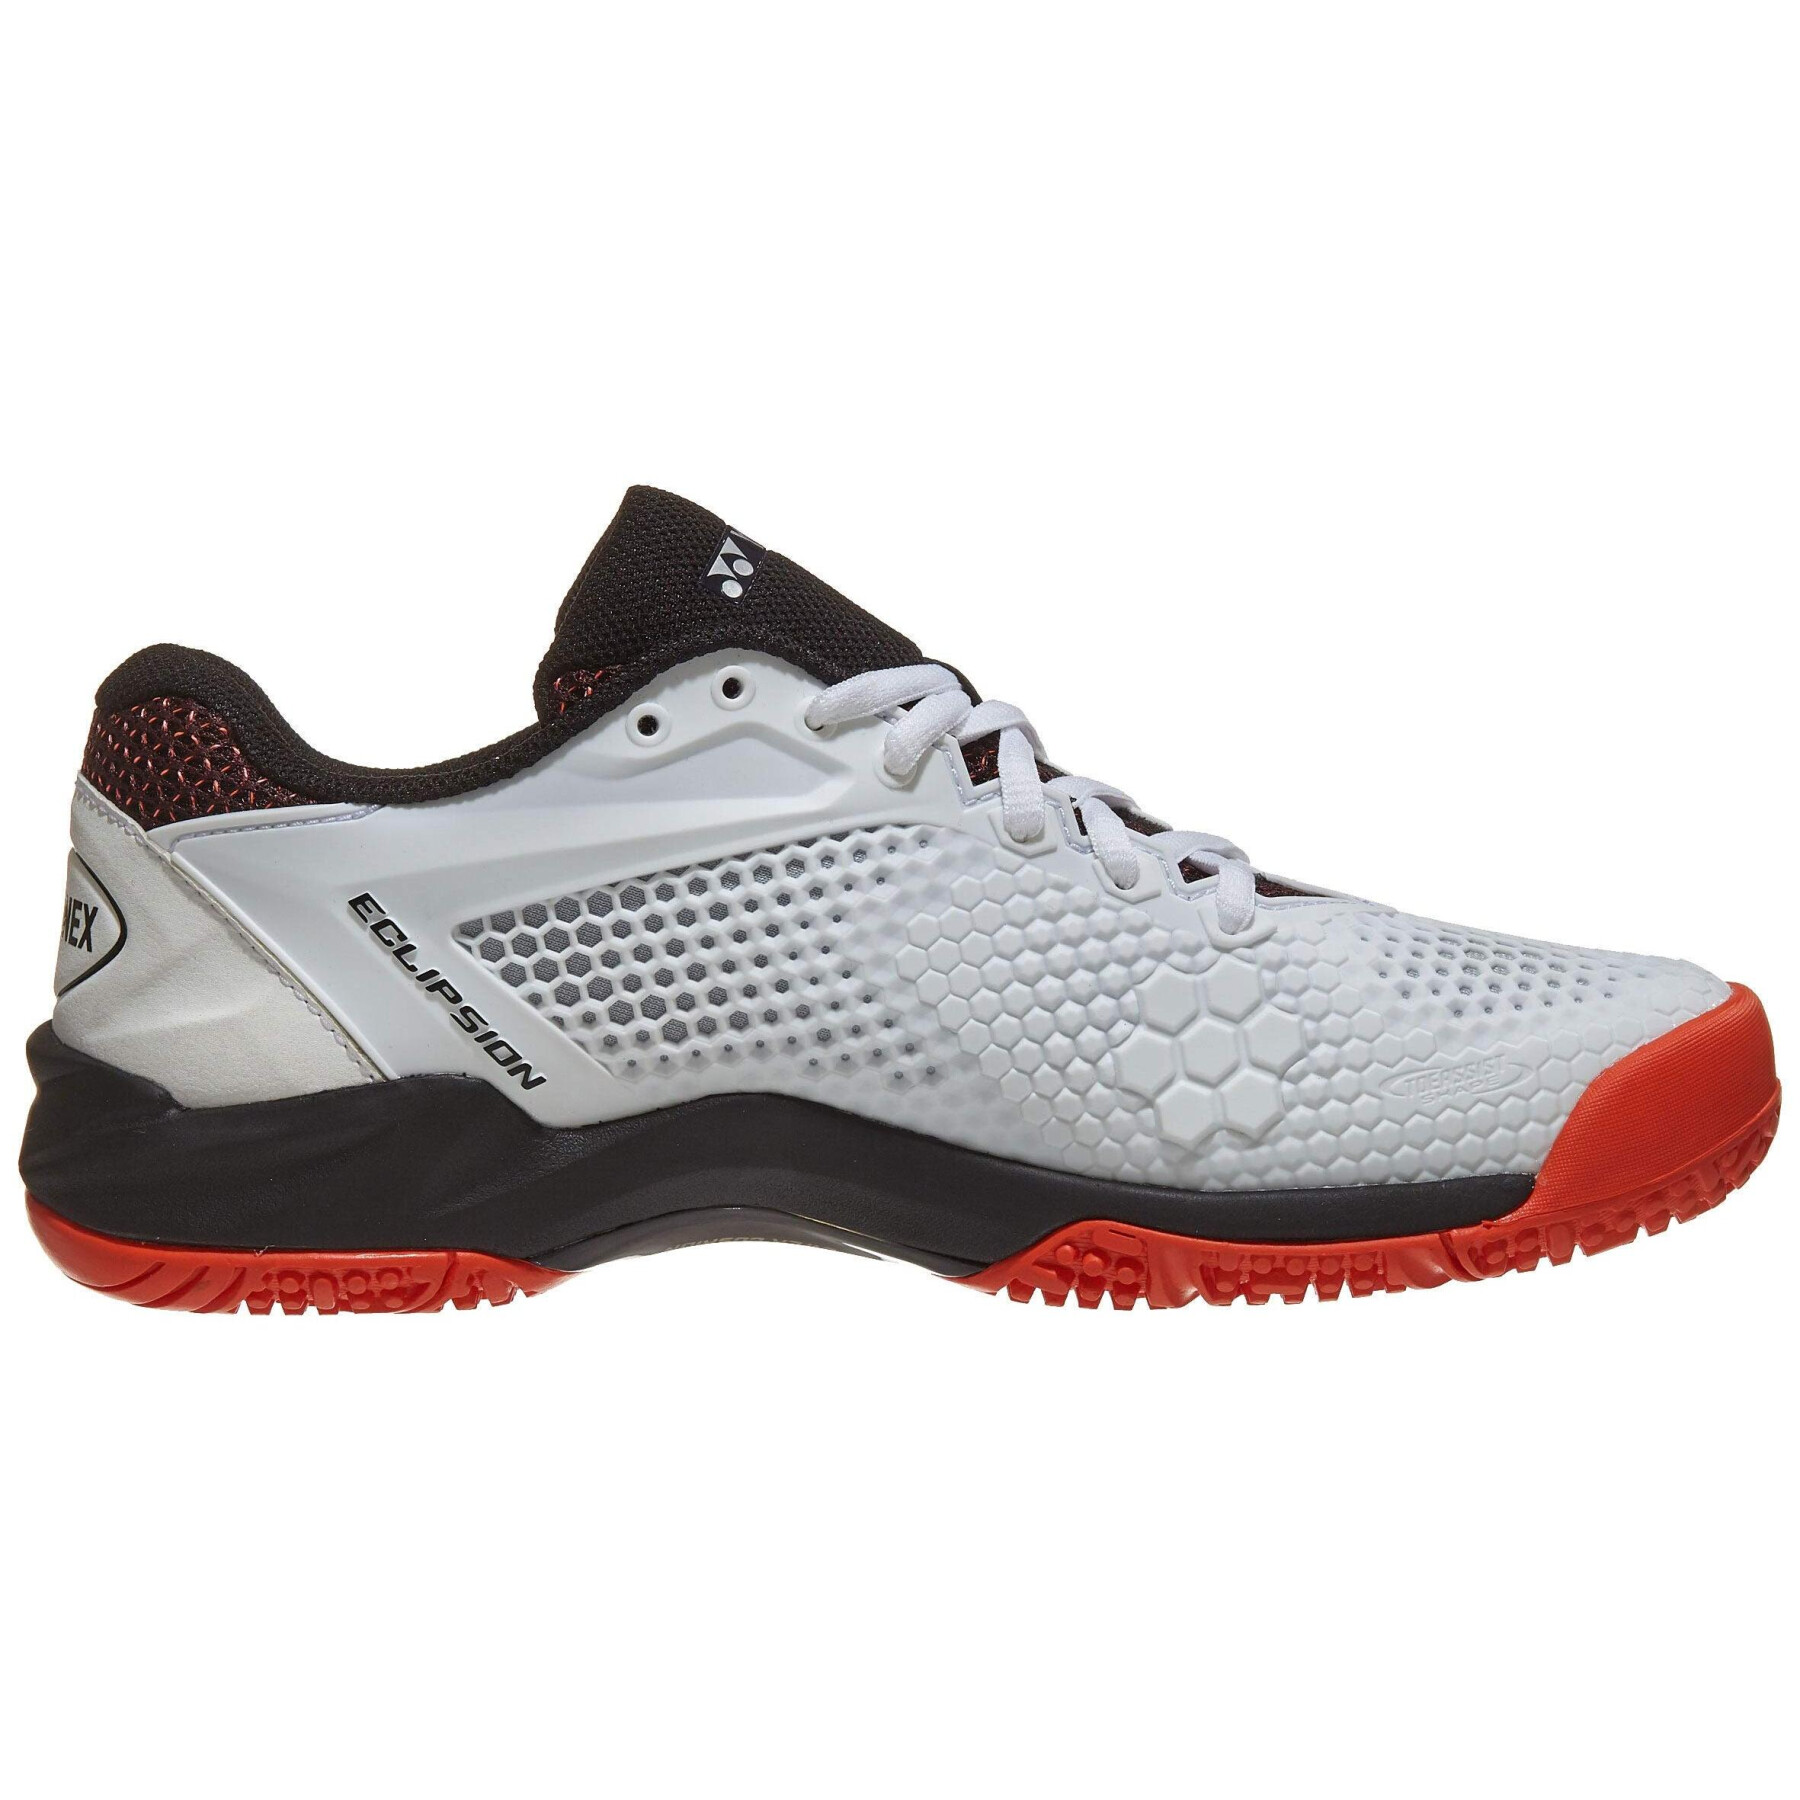 Chaussures indoor Yonex power cushion eclipsion2 cl